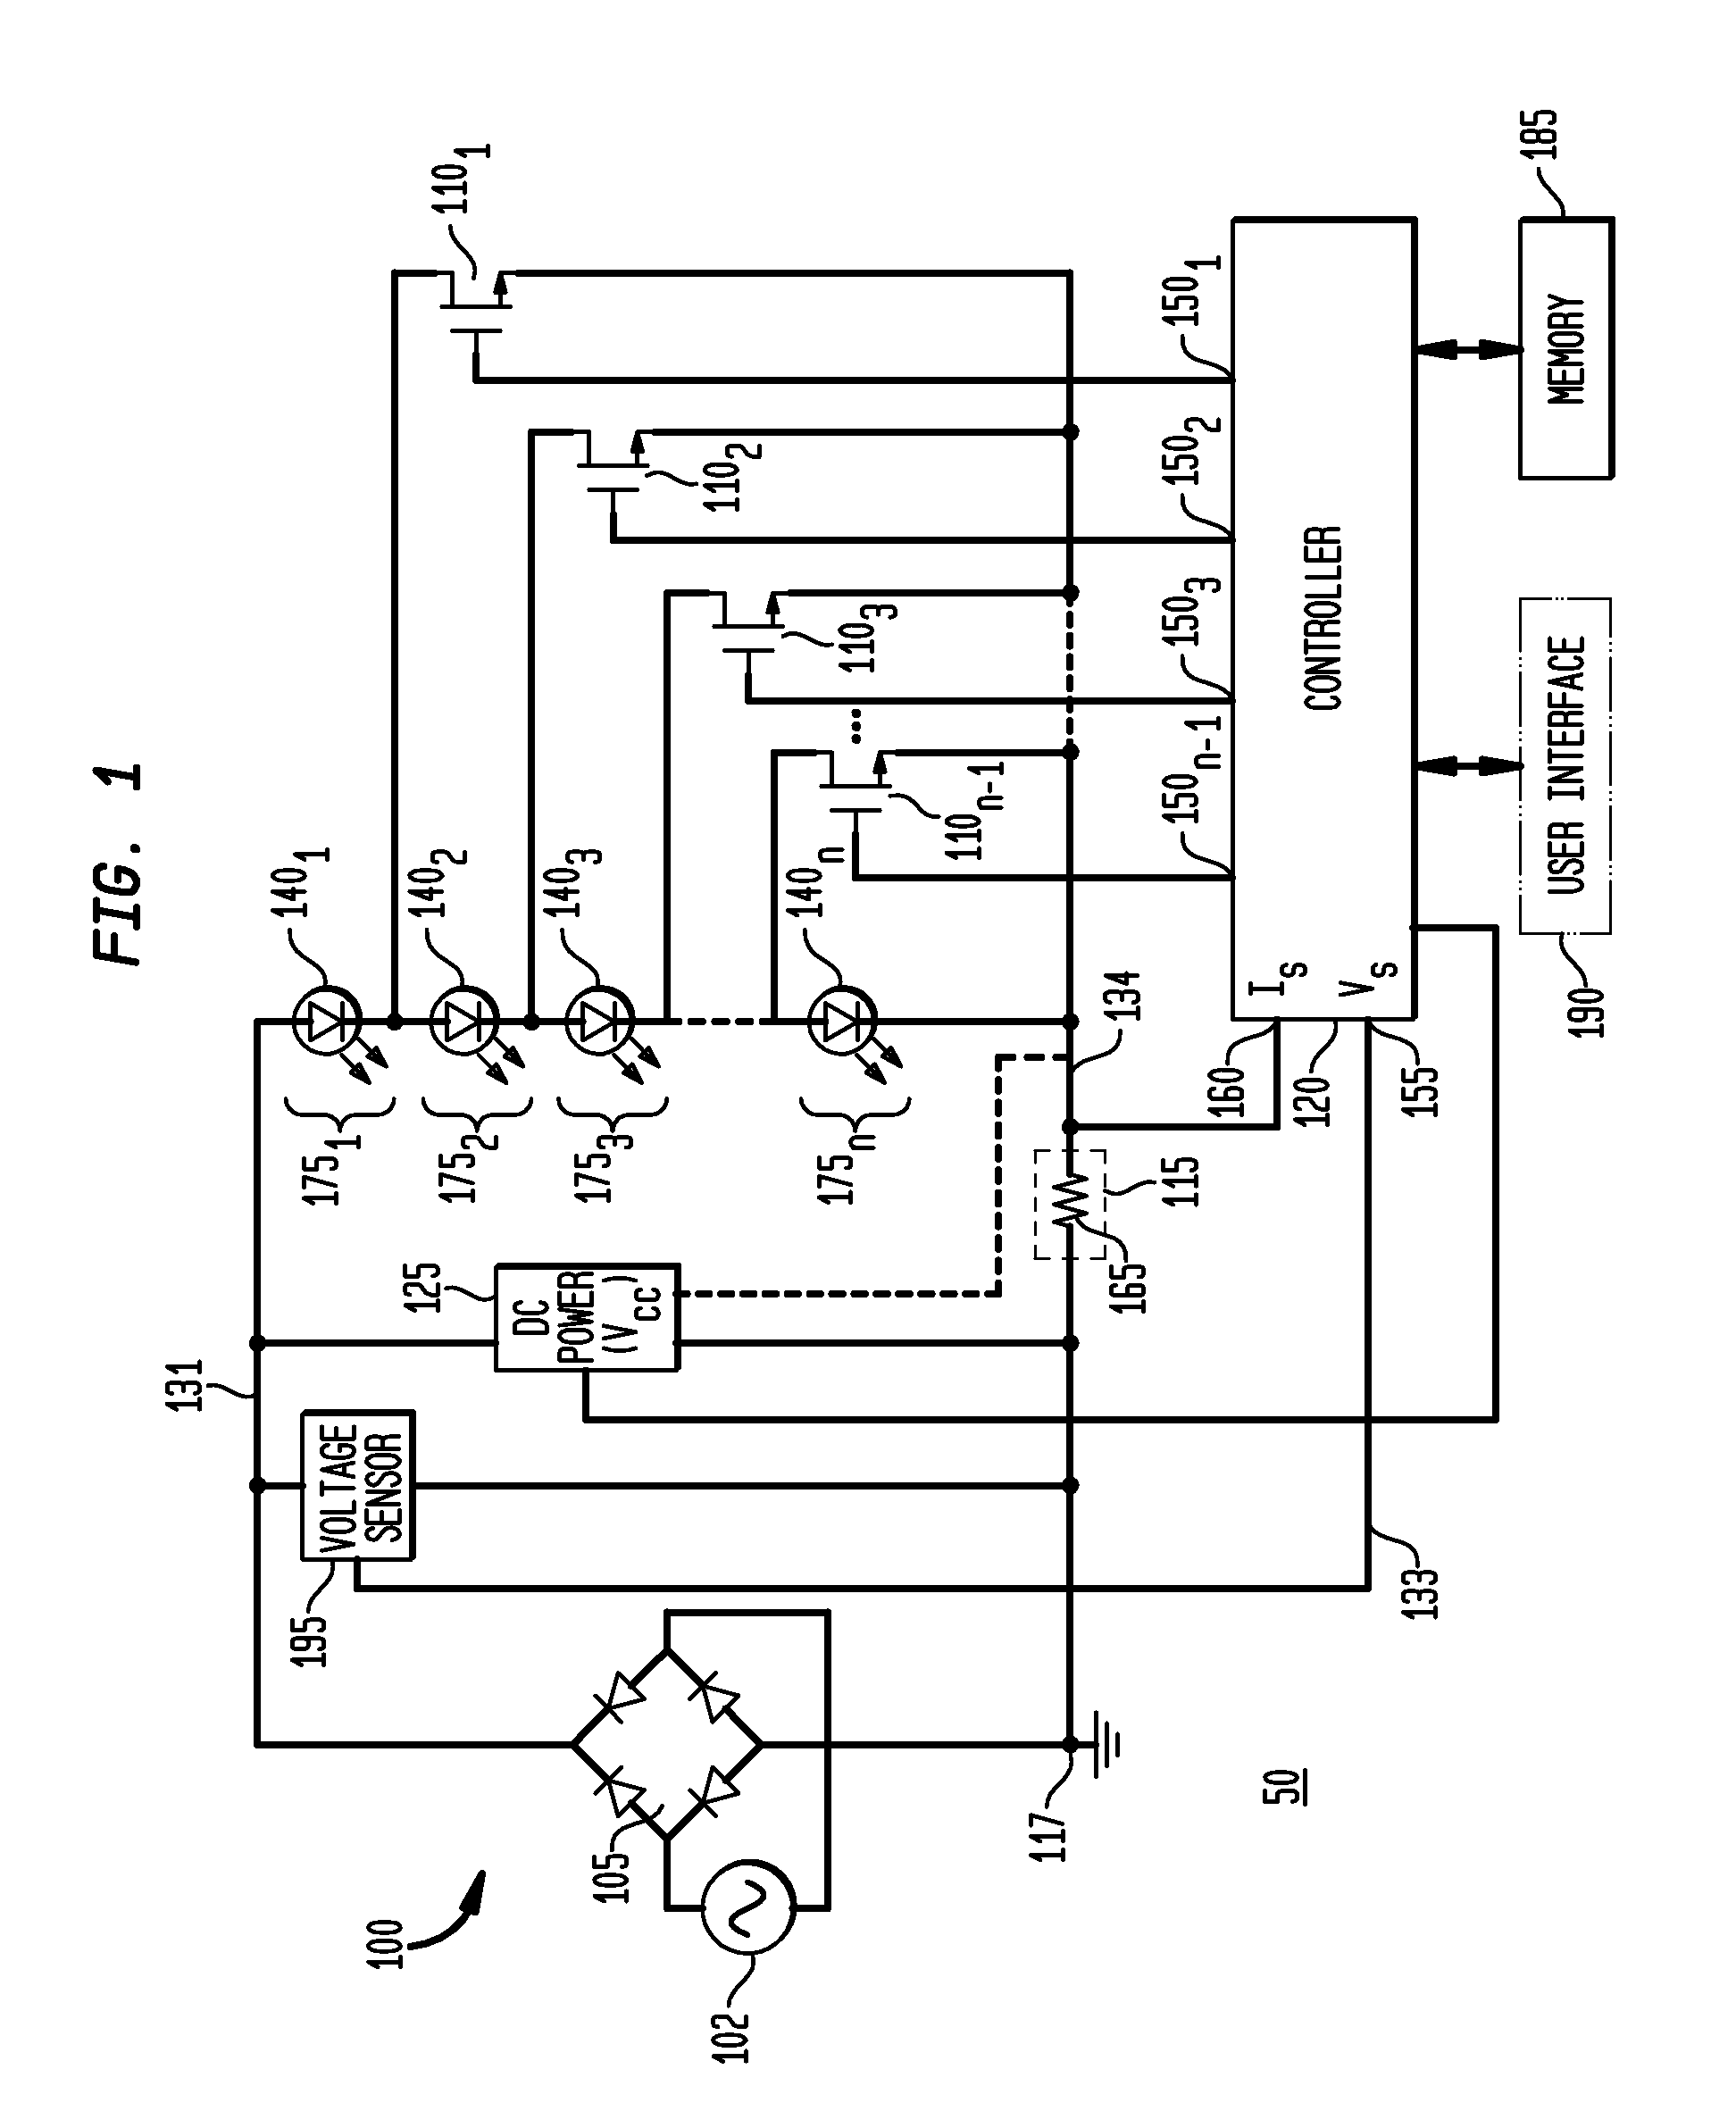 Apparatus, Method and System for Providing AC Line Power to Lighting Devices